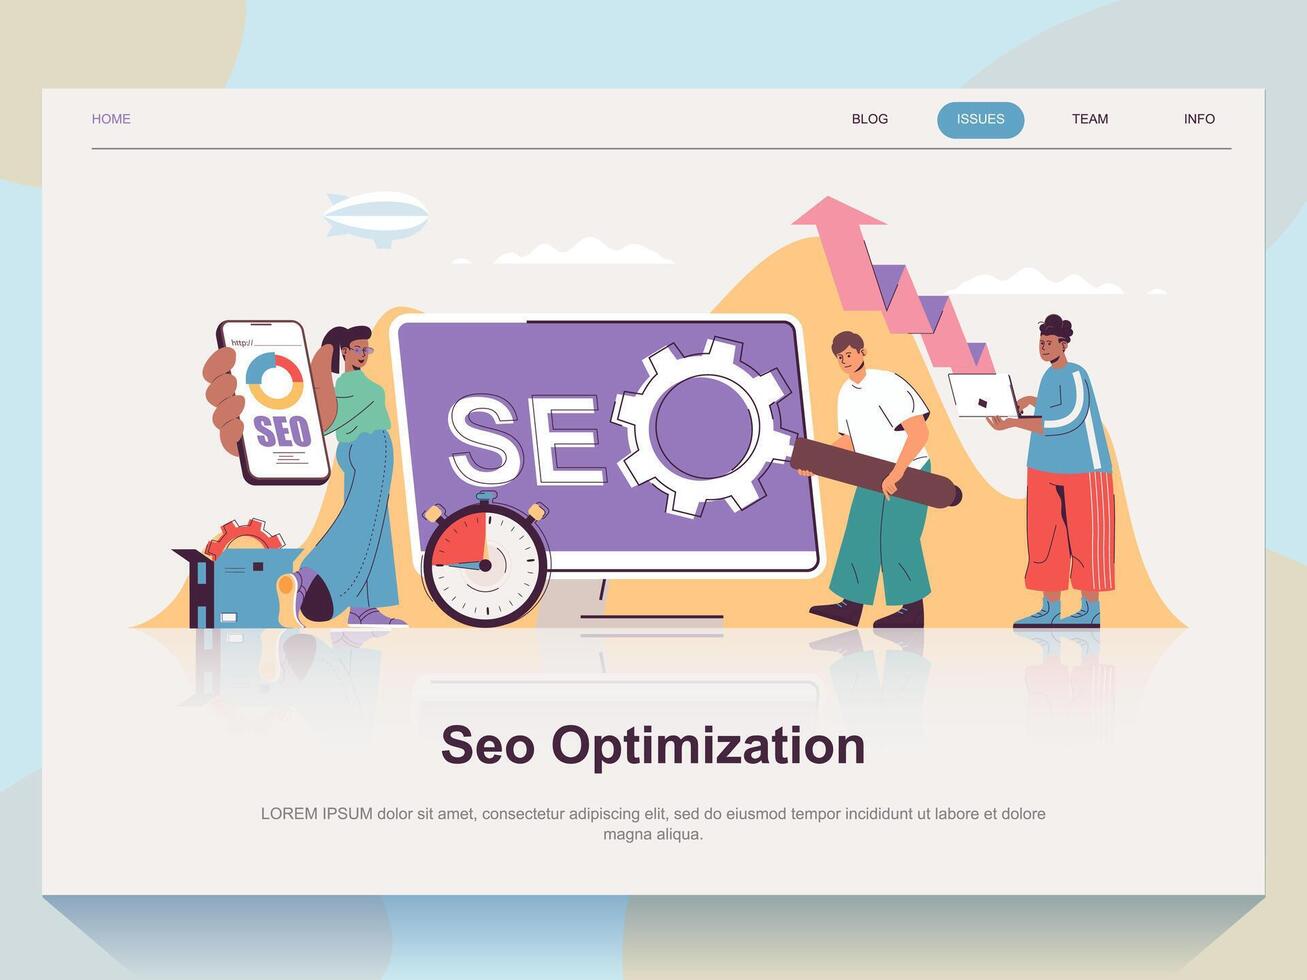 Seo optimization web concept for landing page in flat design. Man and woman making analytics research and optimizes ranking and site traffic. Vector illustration with people scene for website homepage